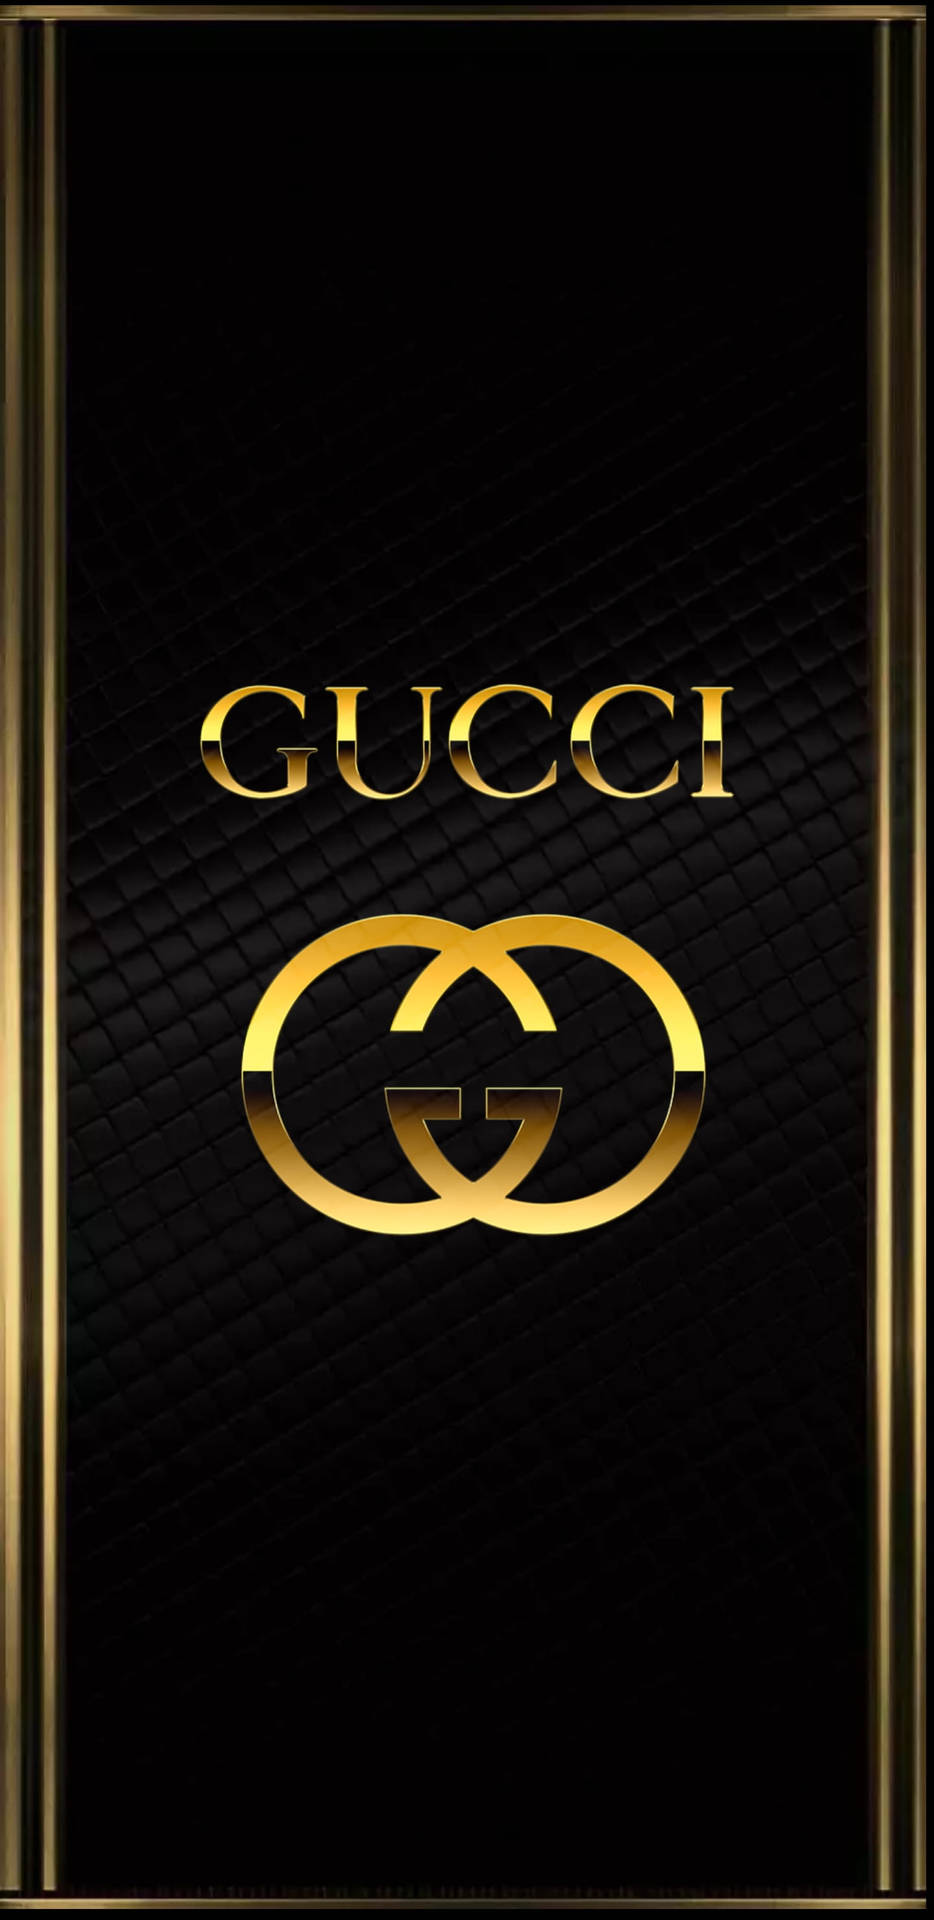 Free Gucci Iphone Wallpaper Downloads, [100+] Gucci Iphone Wallpapers for  FREE 